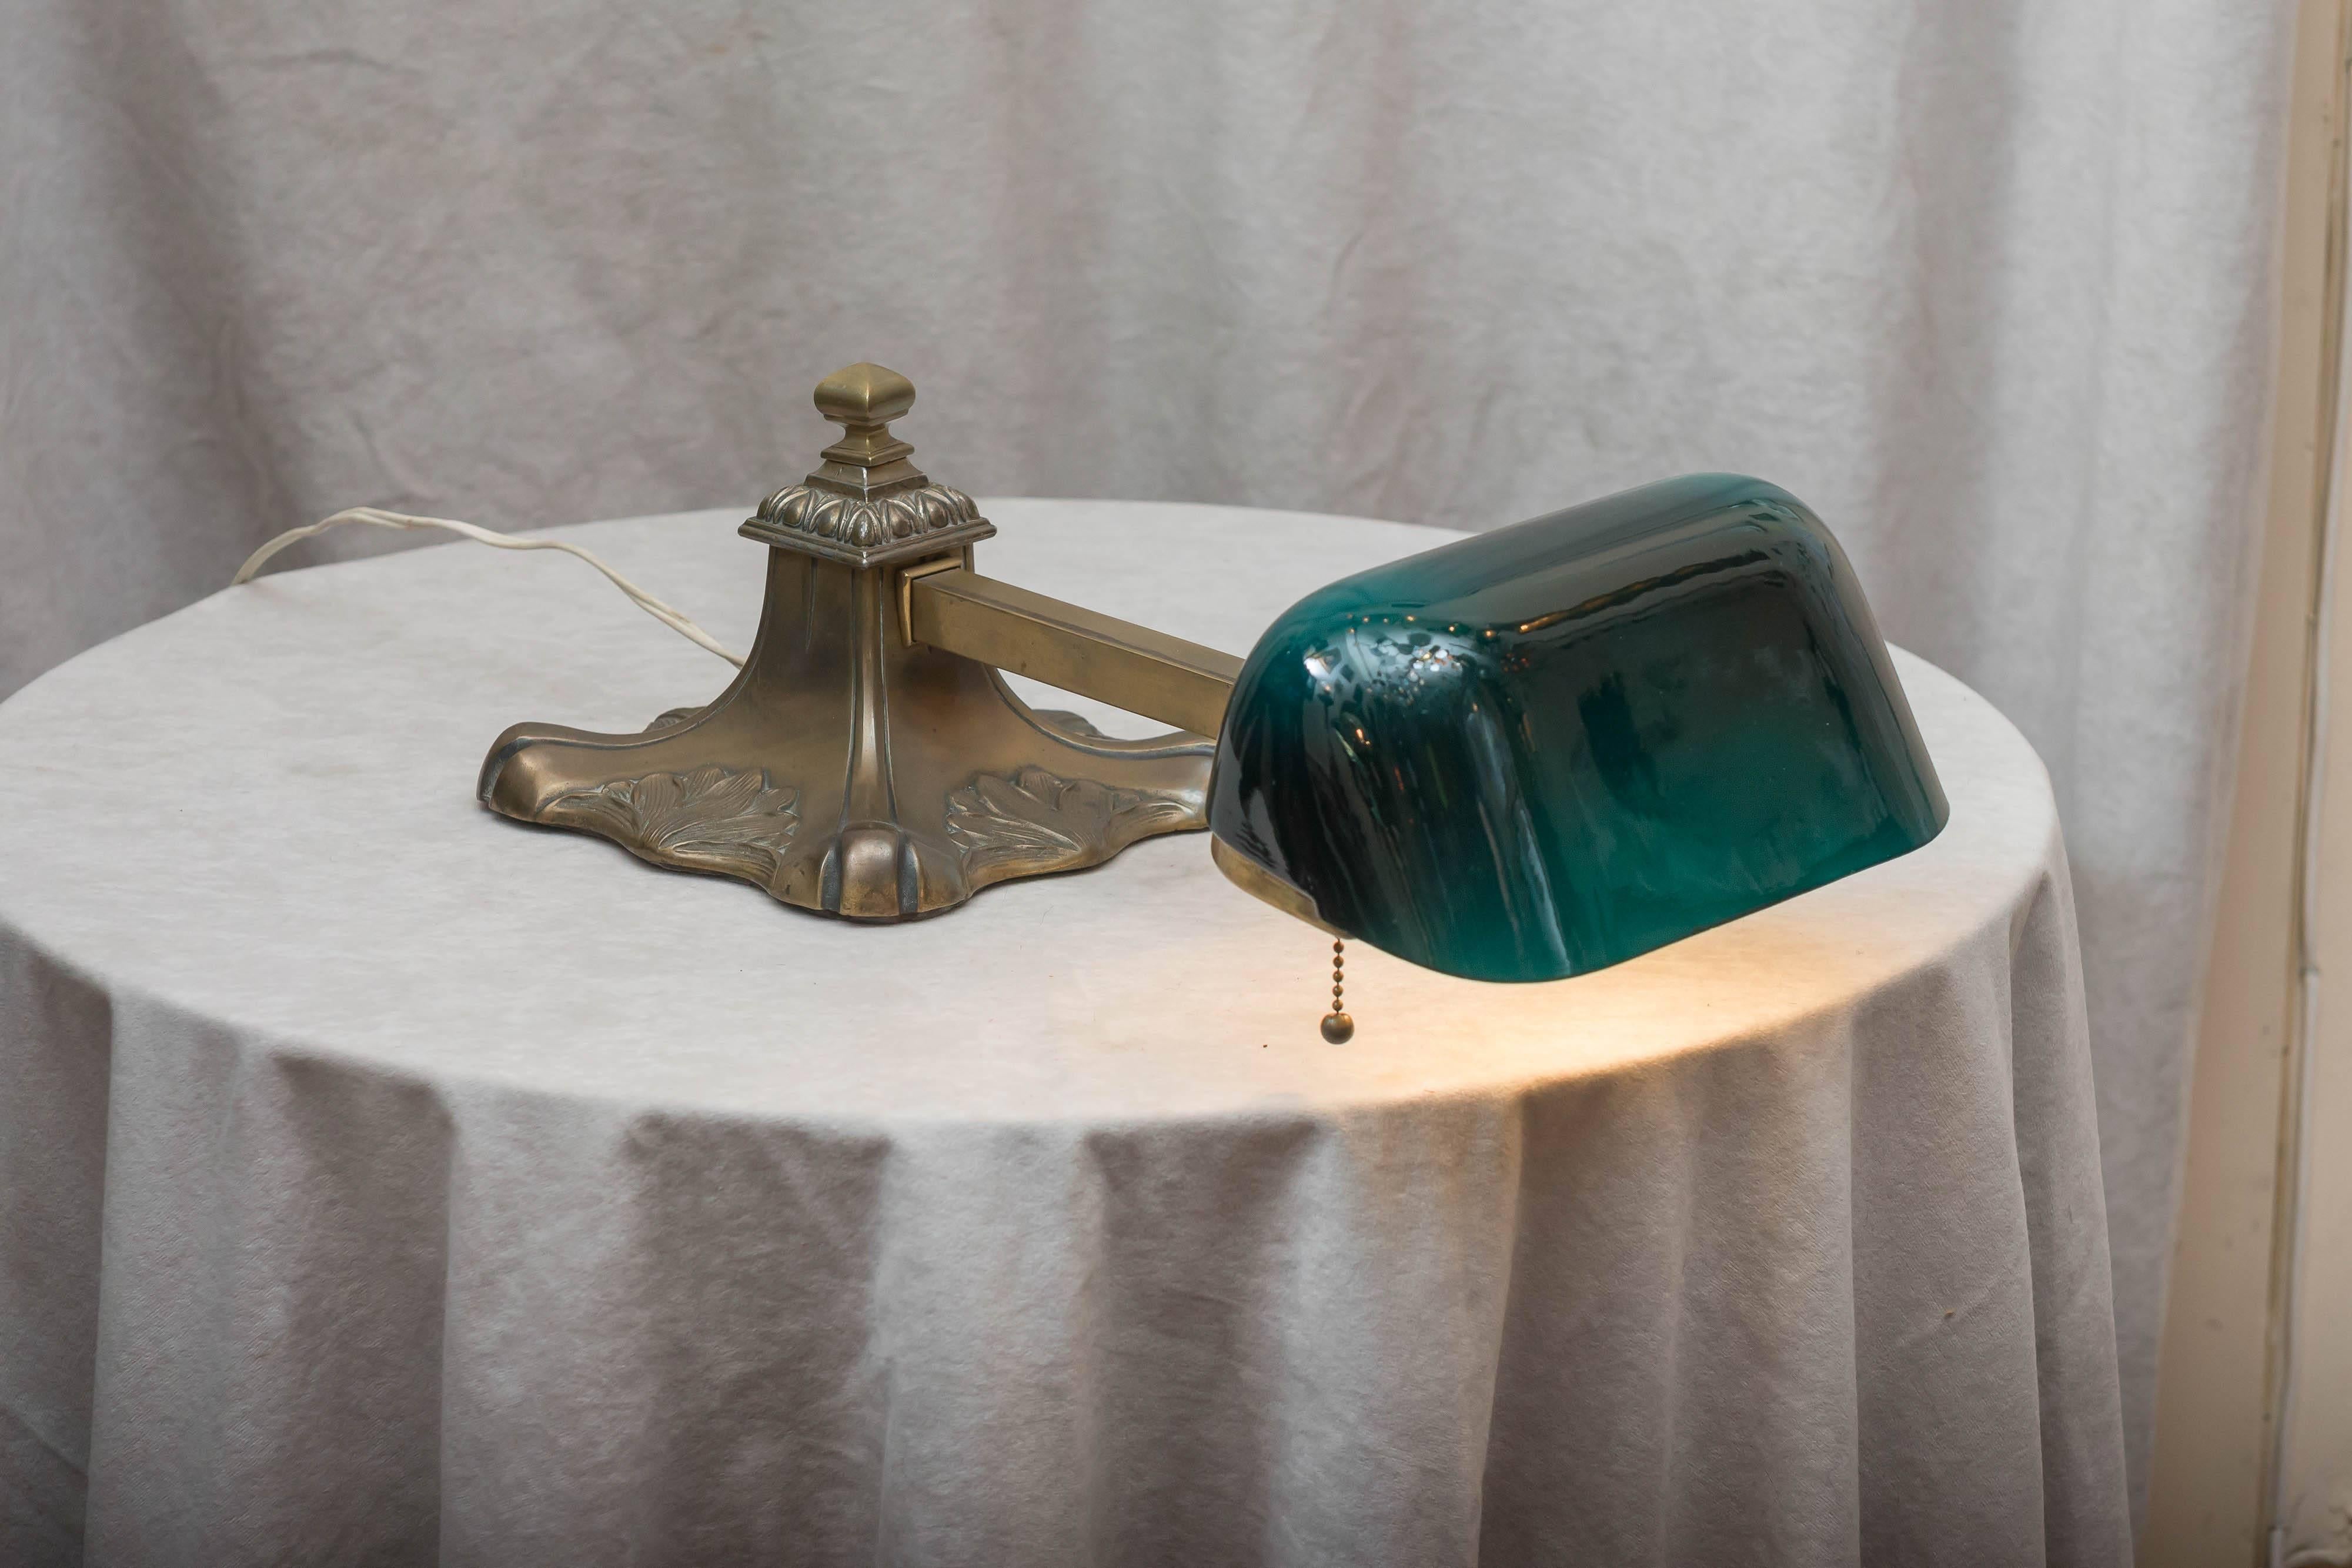 Early 20th Century Green Shade Banker's Lamp for a Roll Top Desk Etc by Emeralite, Art Nouveau